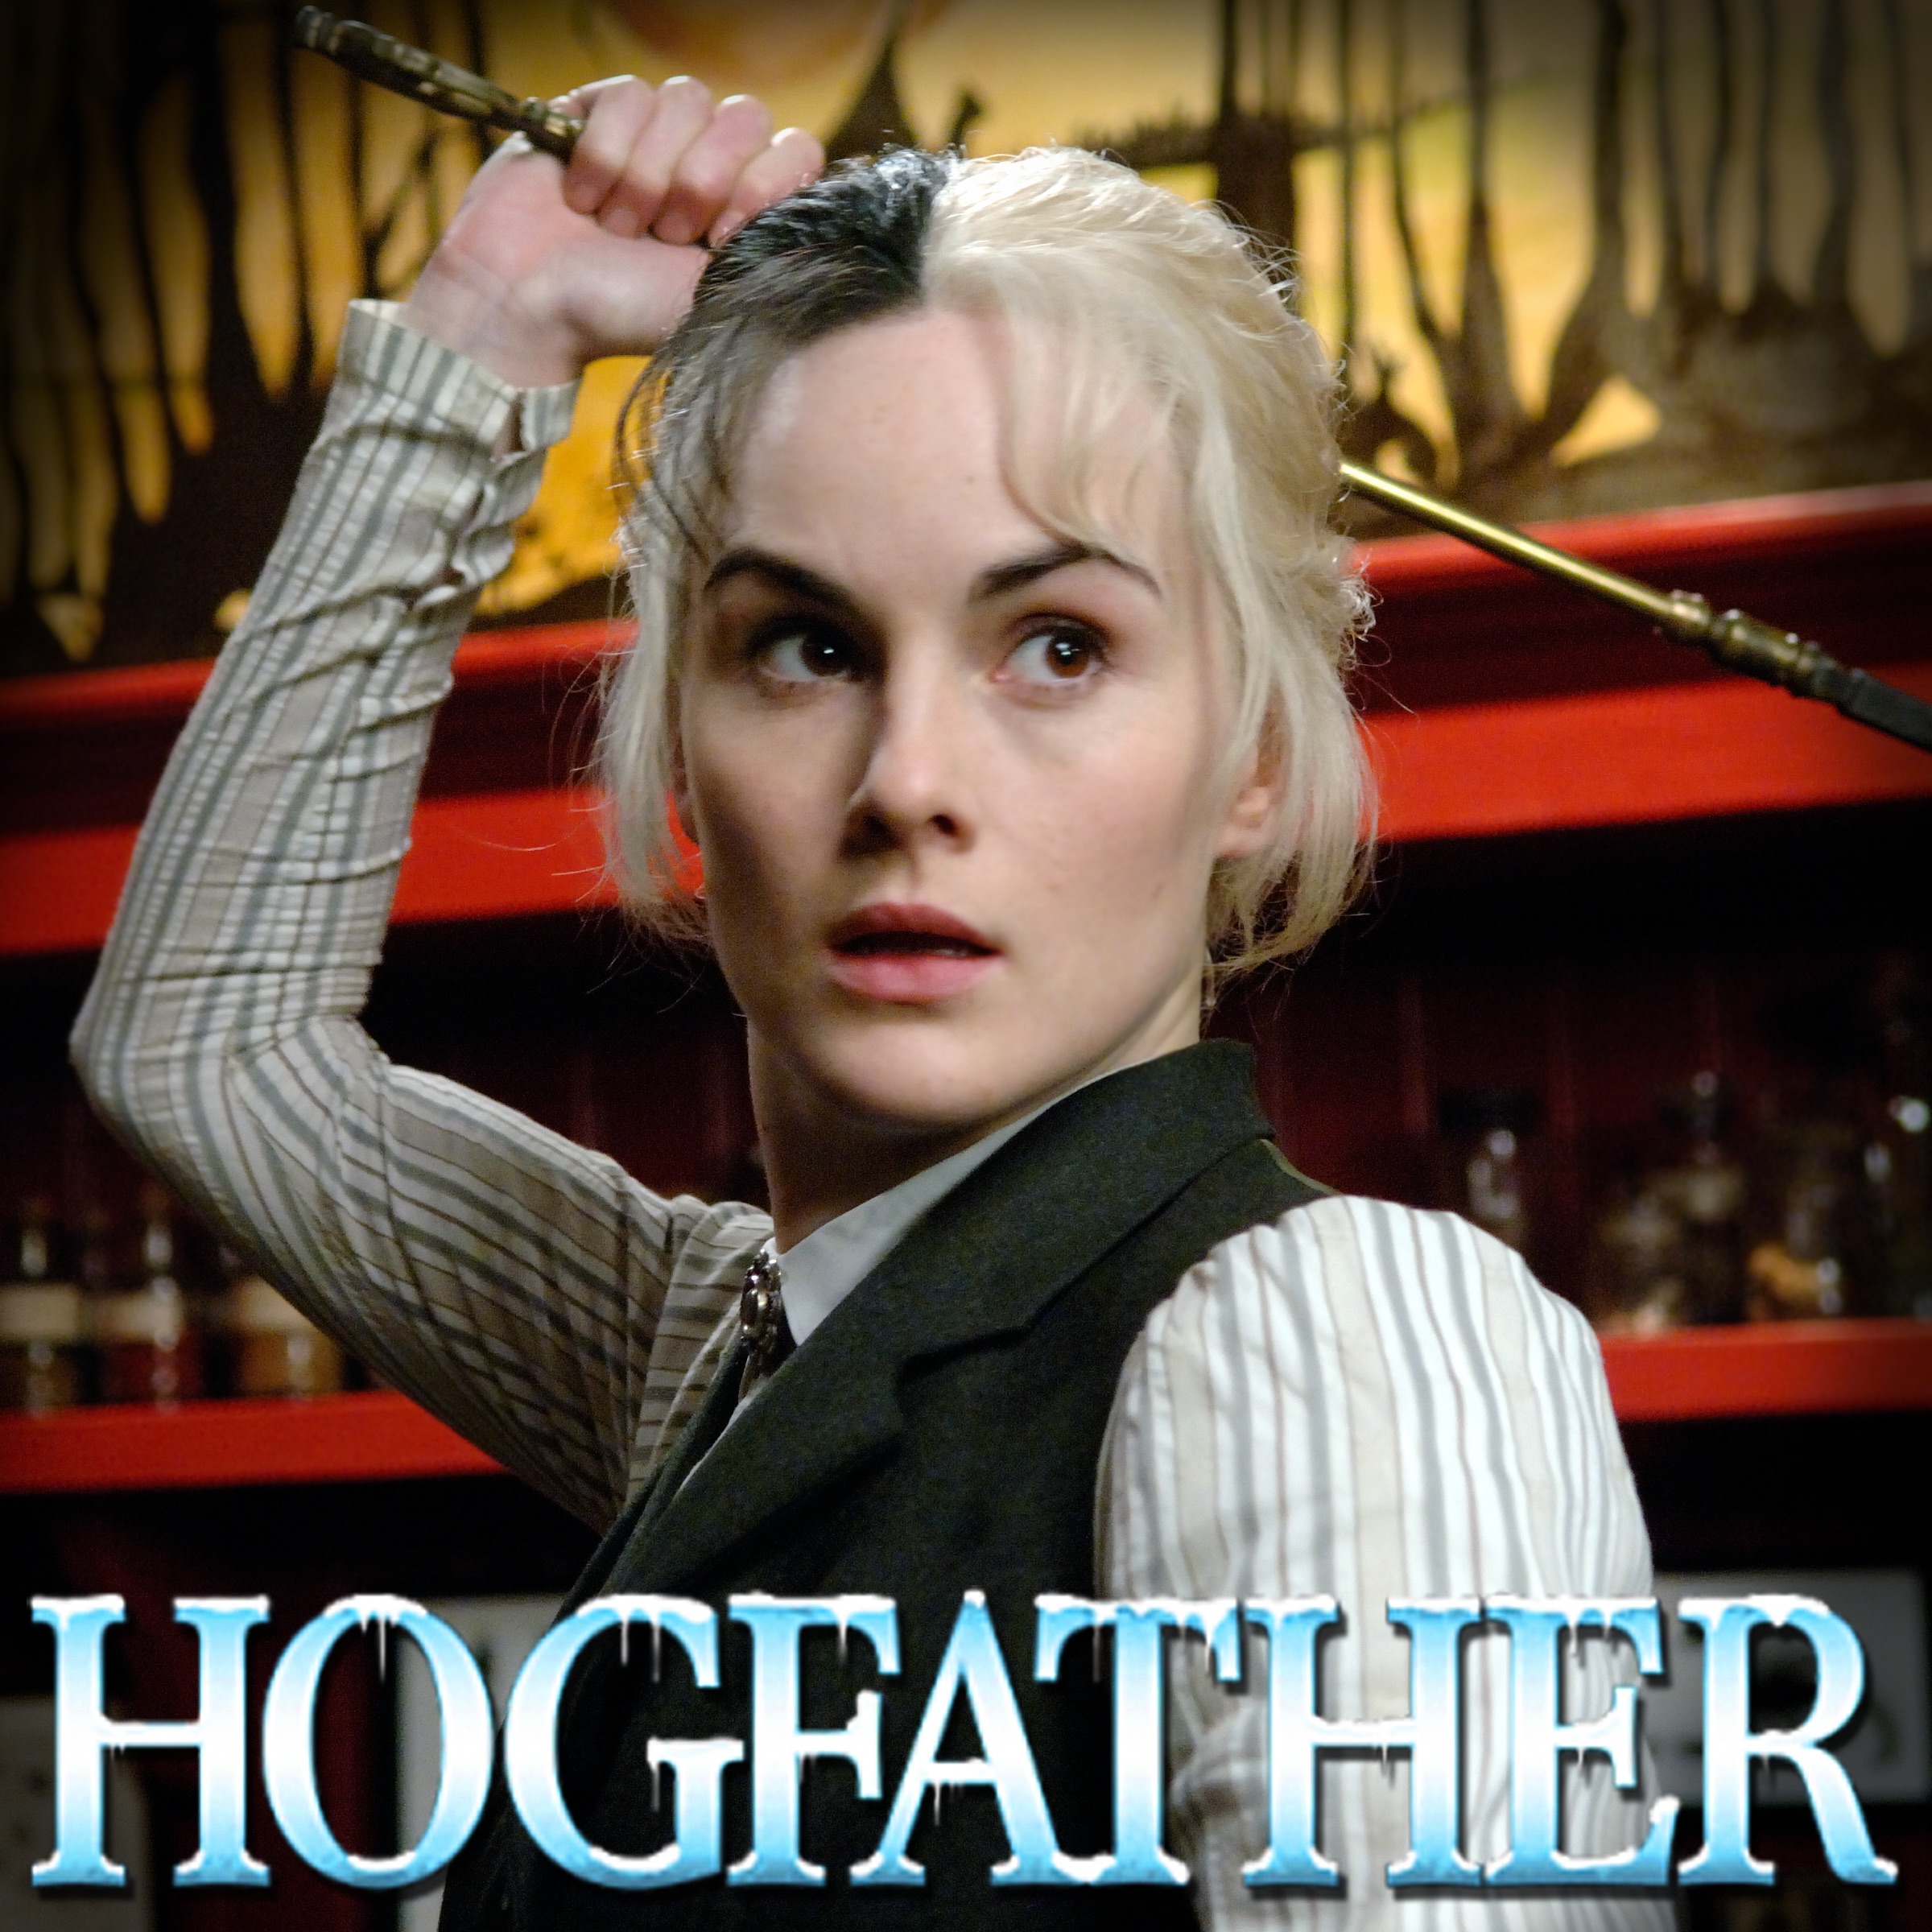 download hogfather